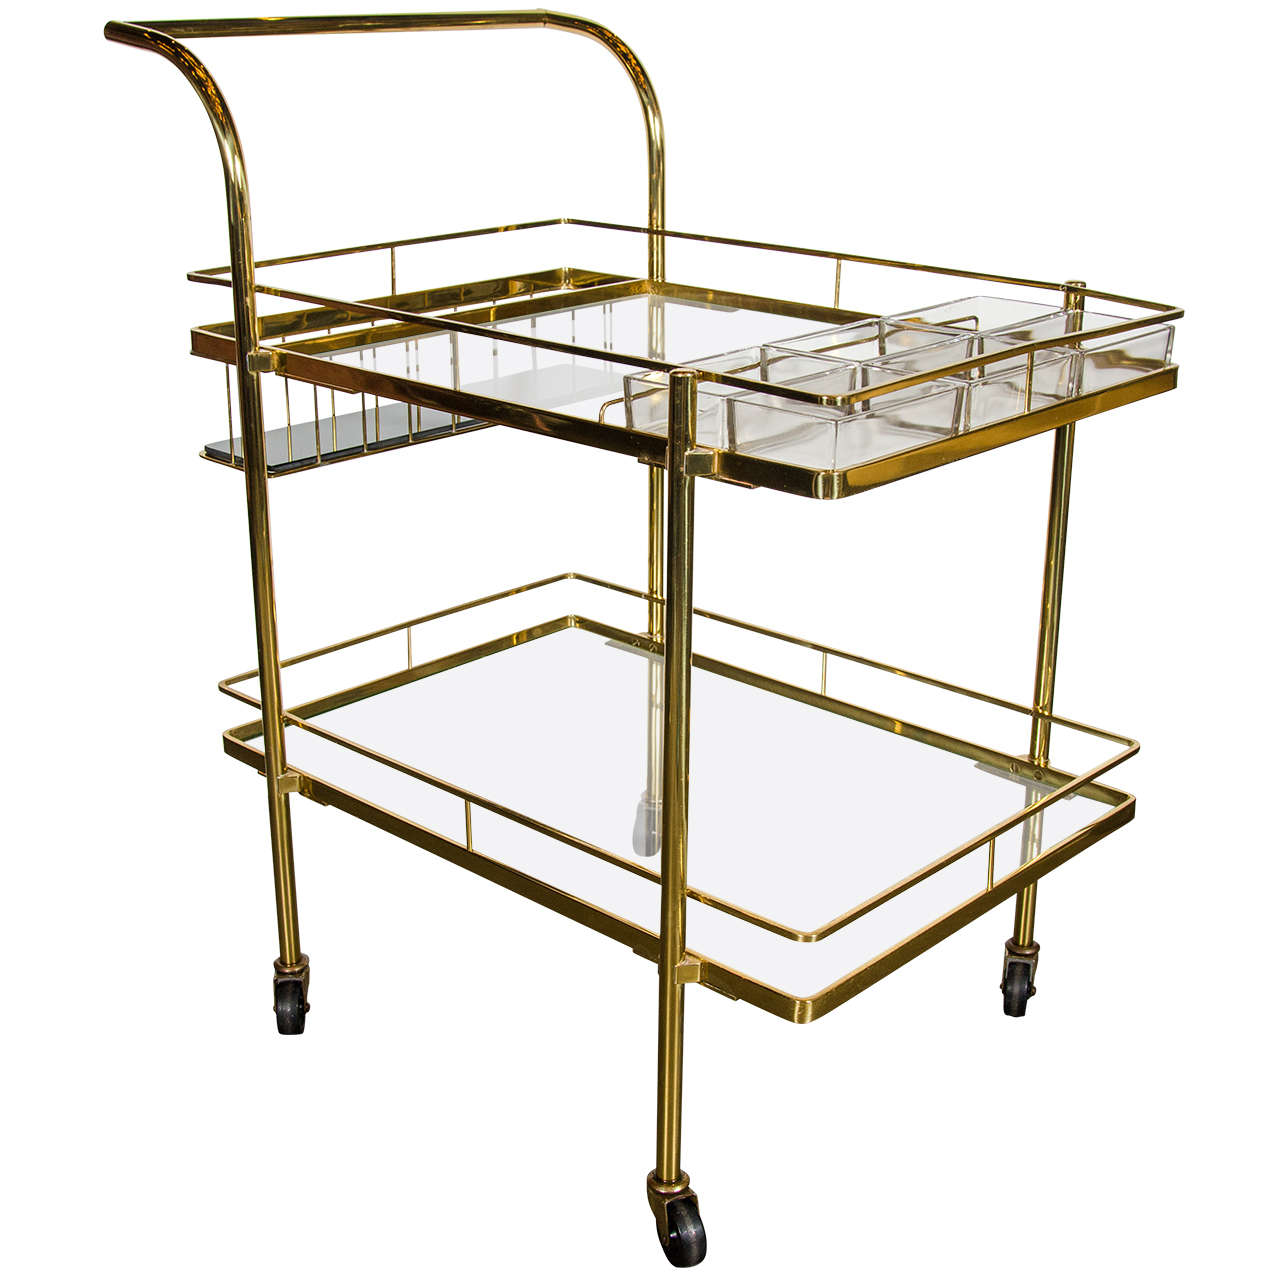 Sophisticated Mid-Century Modern Bar Cart in Brass with Glass Shelves